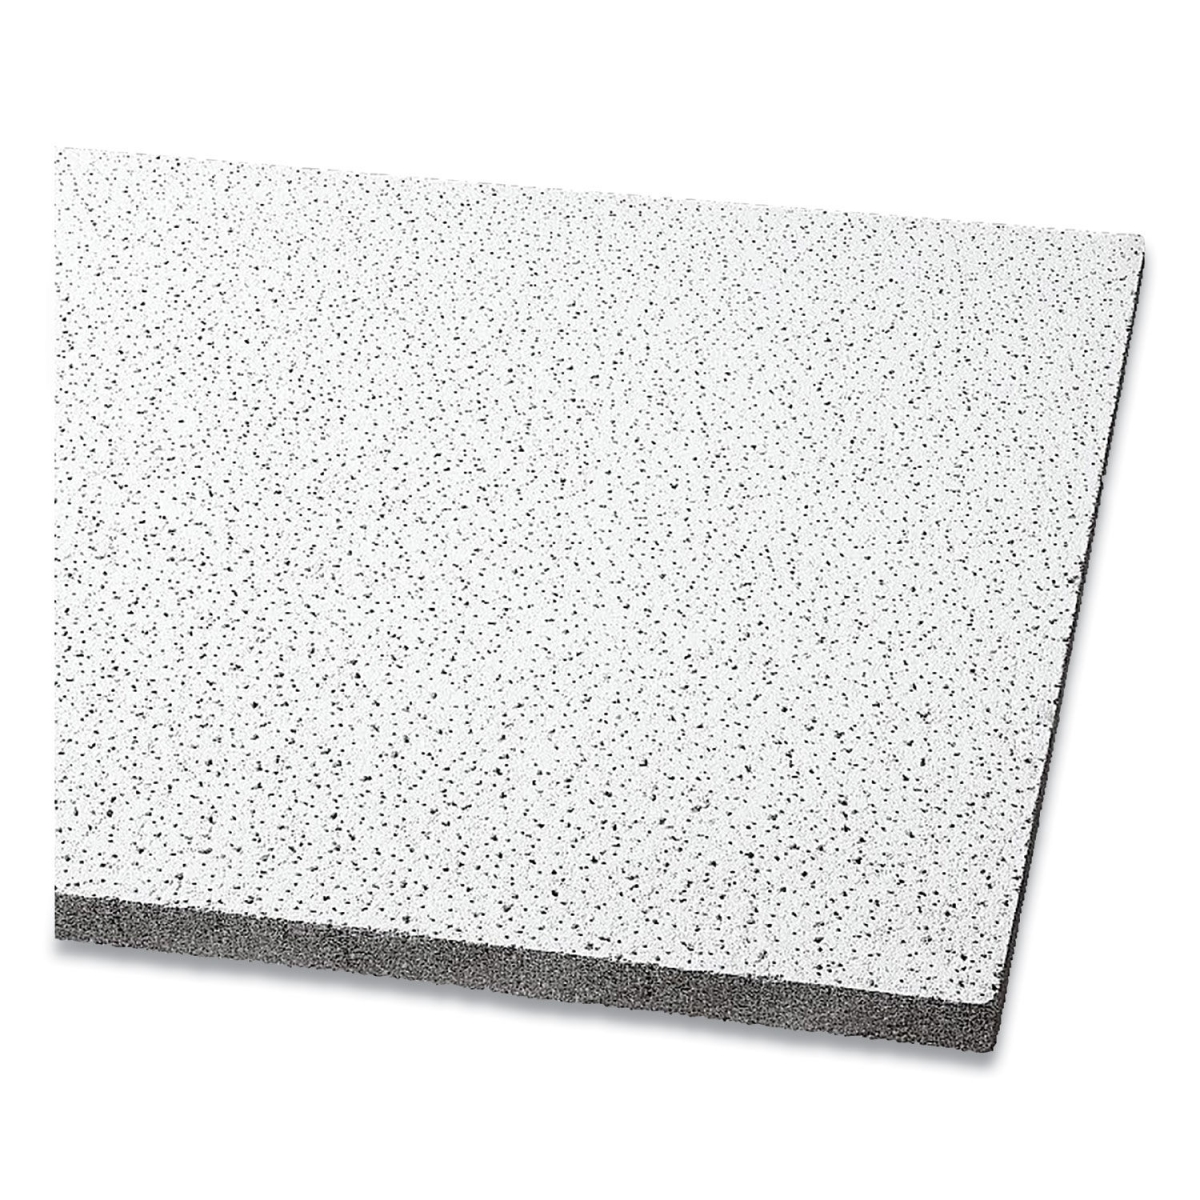 Picture of Armstrong 1714 2 x 4 ft. Square Lay-In Fine Fissured Acoustical Infill Ceiling Tiles - 8 per Case